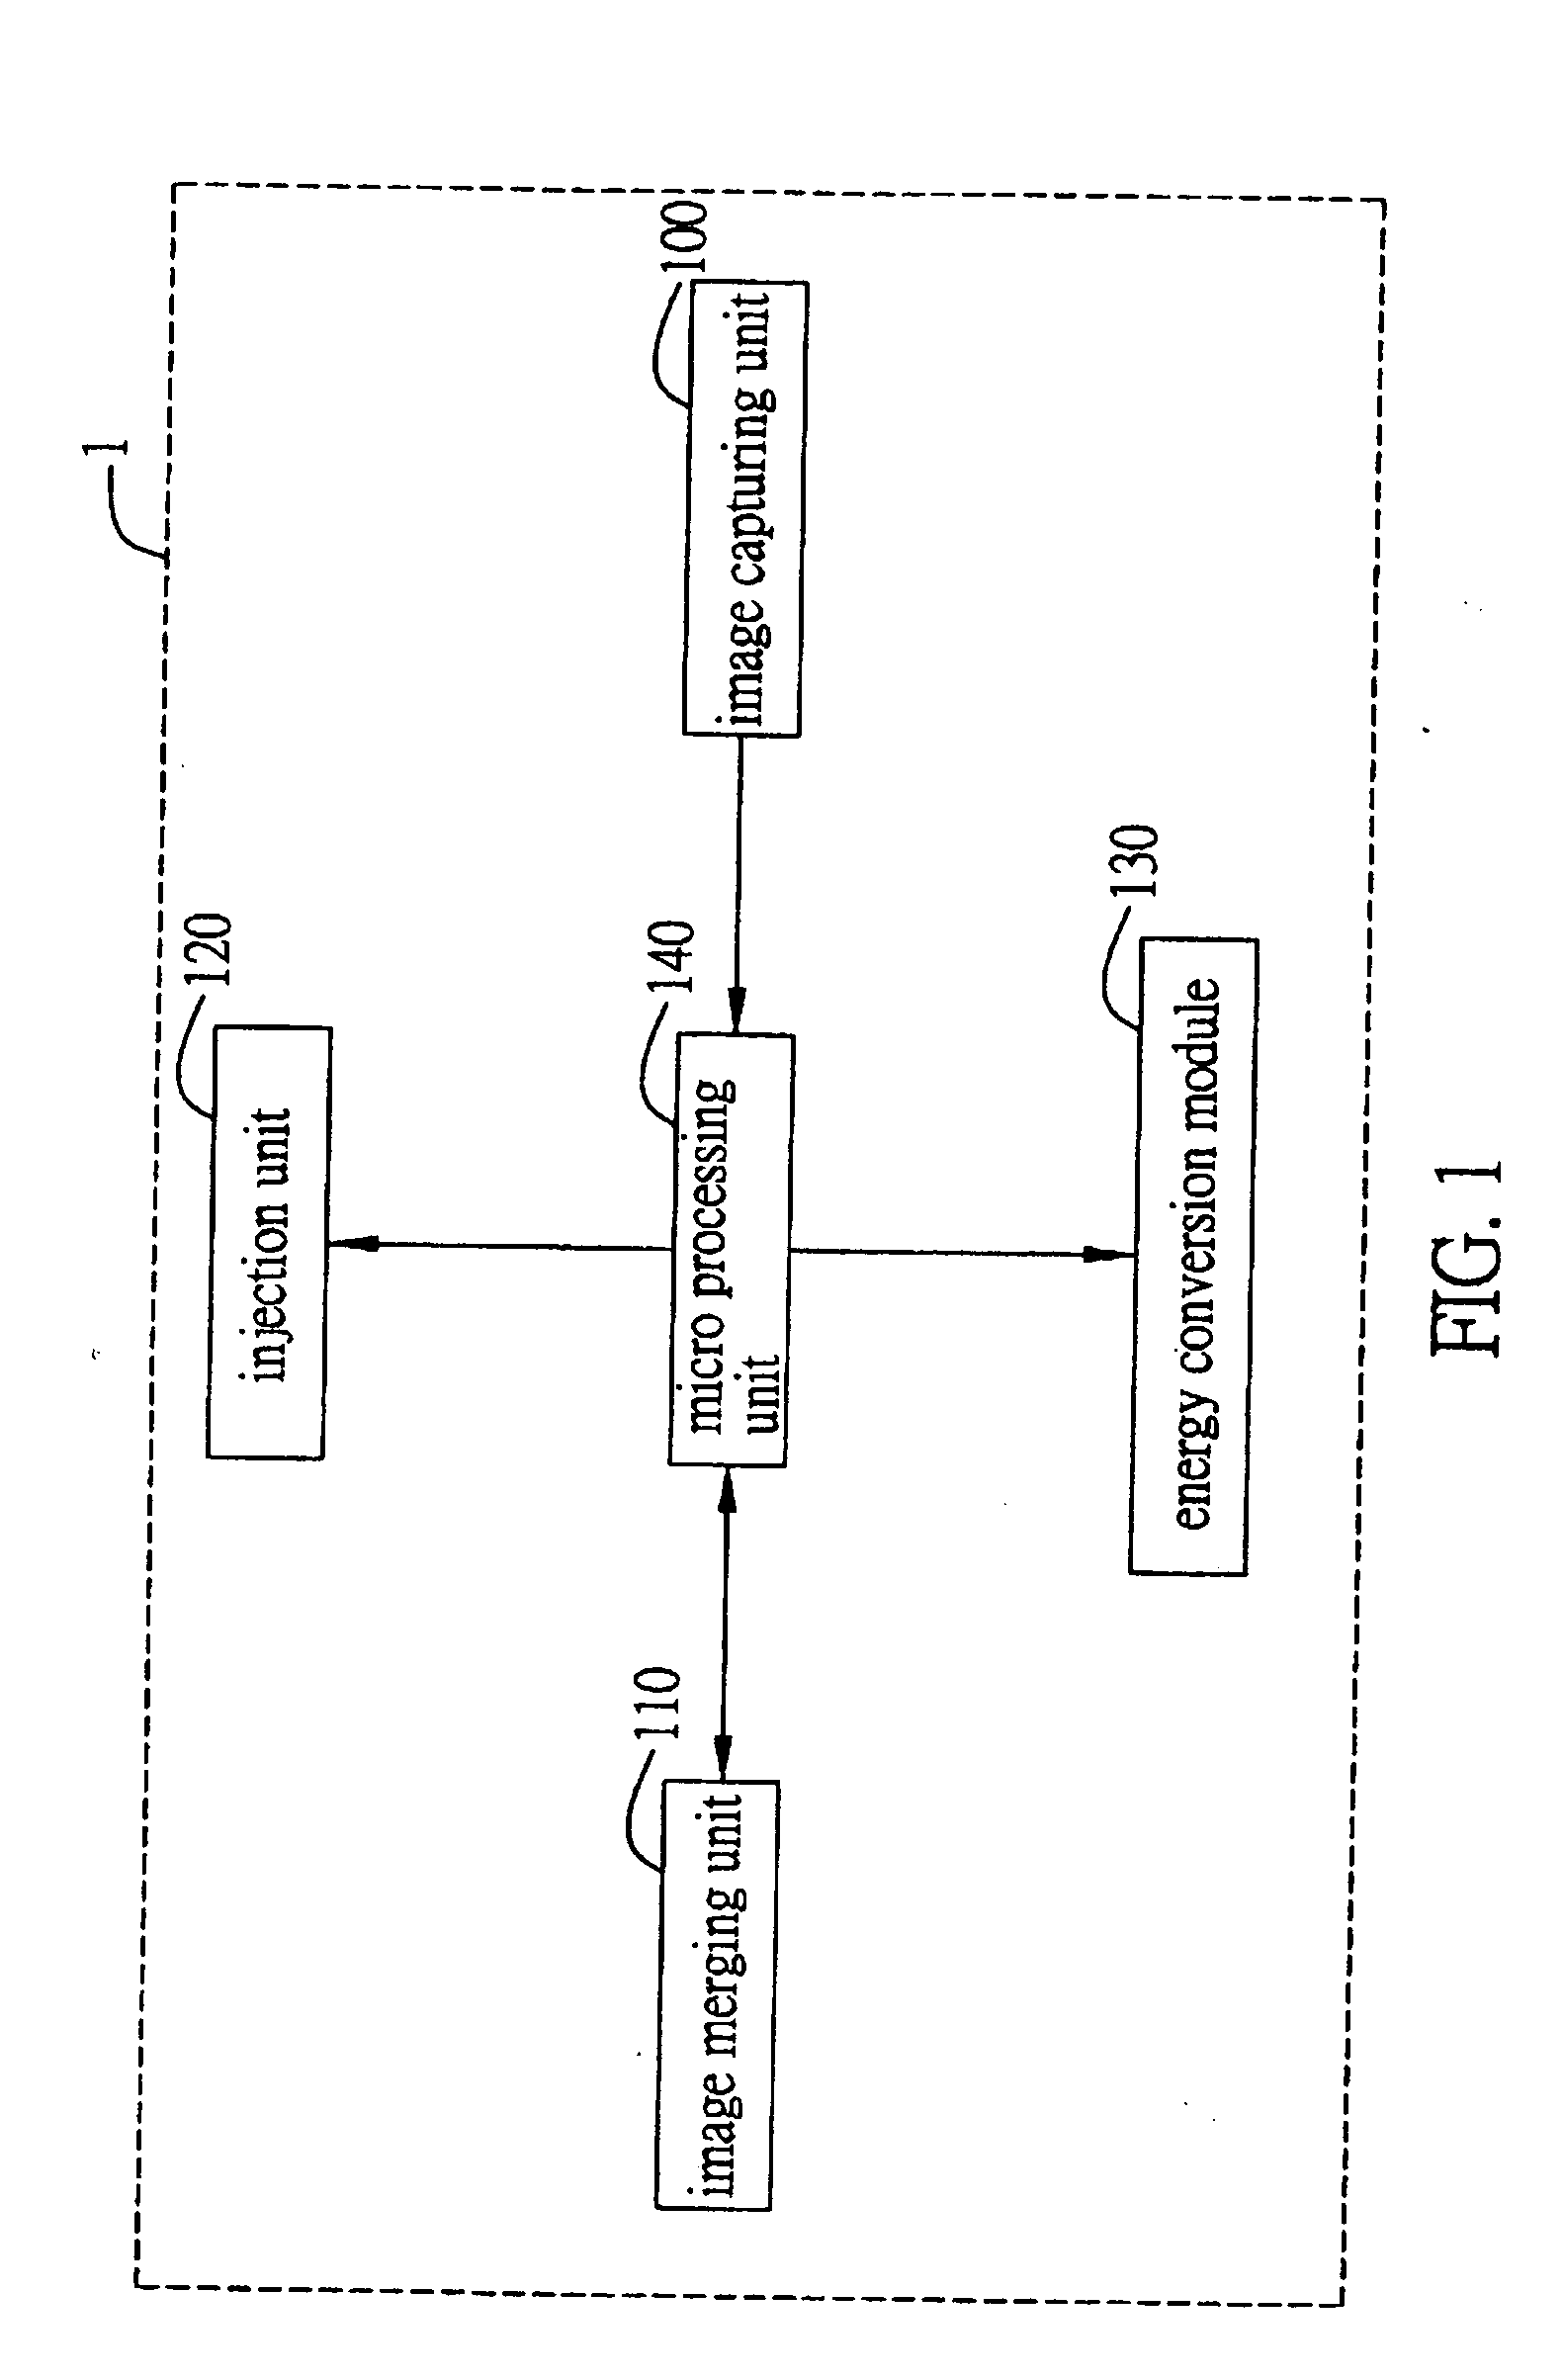 Method and system for leading macromolecule substances into living target cells